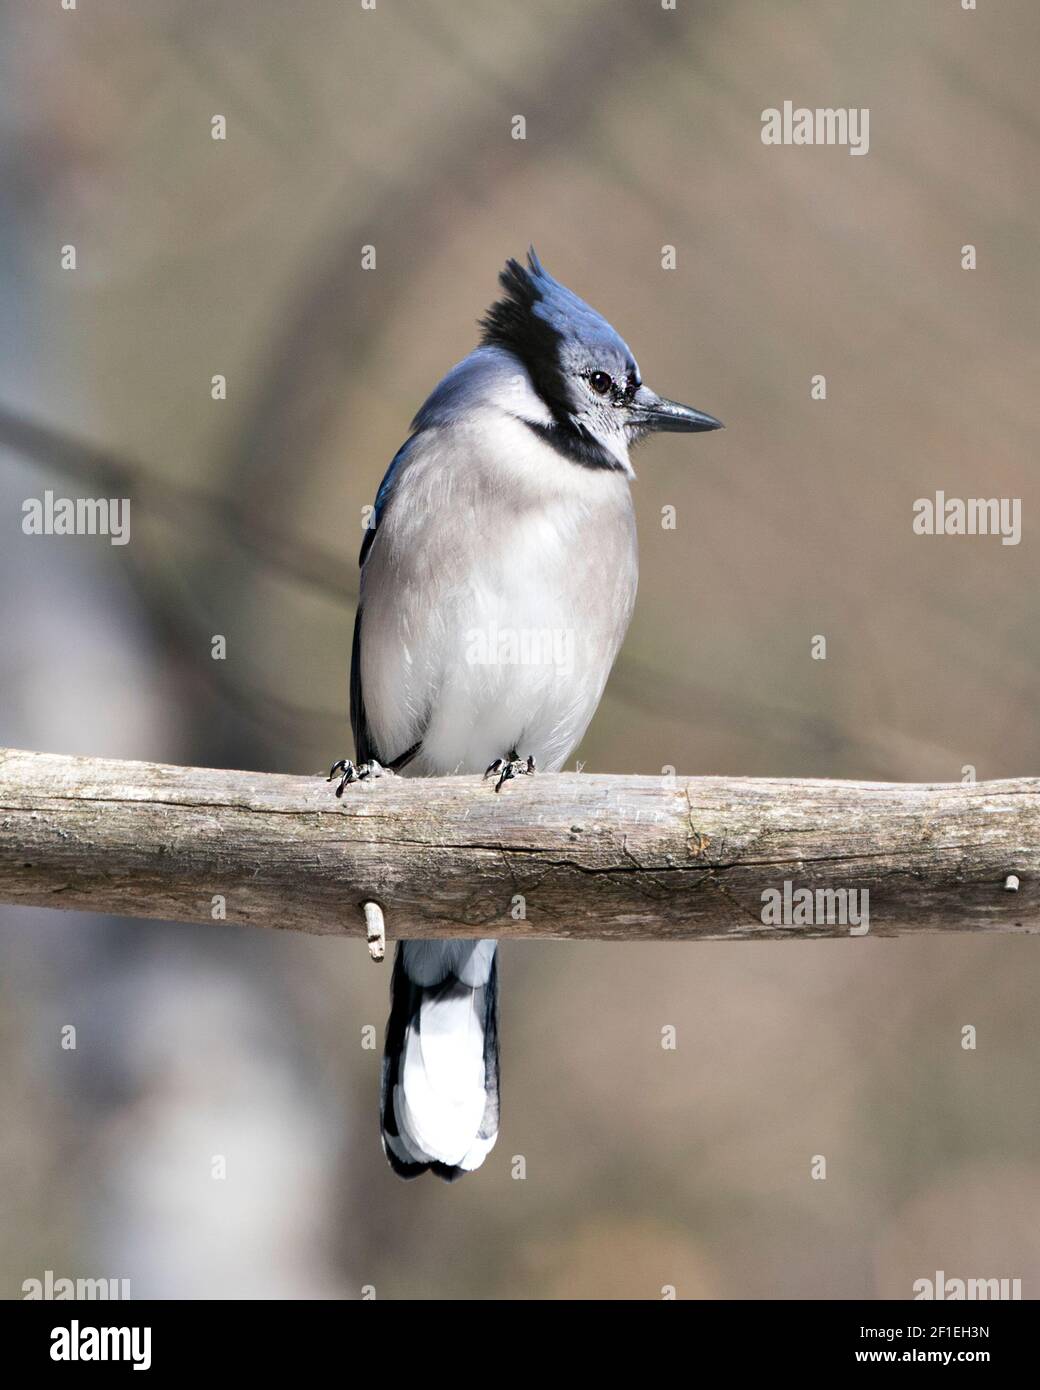 Blue Jay close-up profile view perched on a branch with a blur background in the forest environment and habitat looking to the right side. Image. Stock Photo